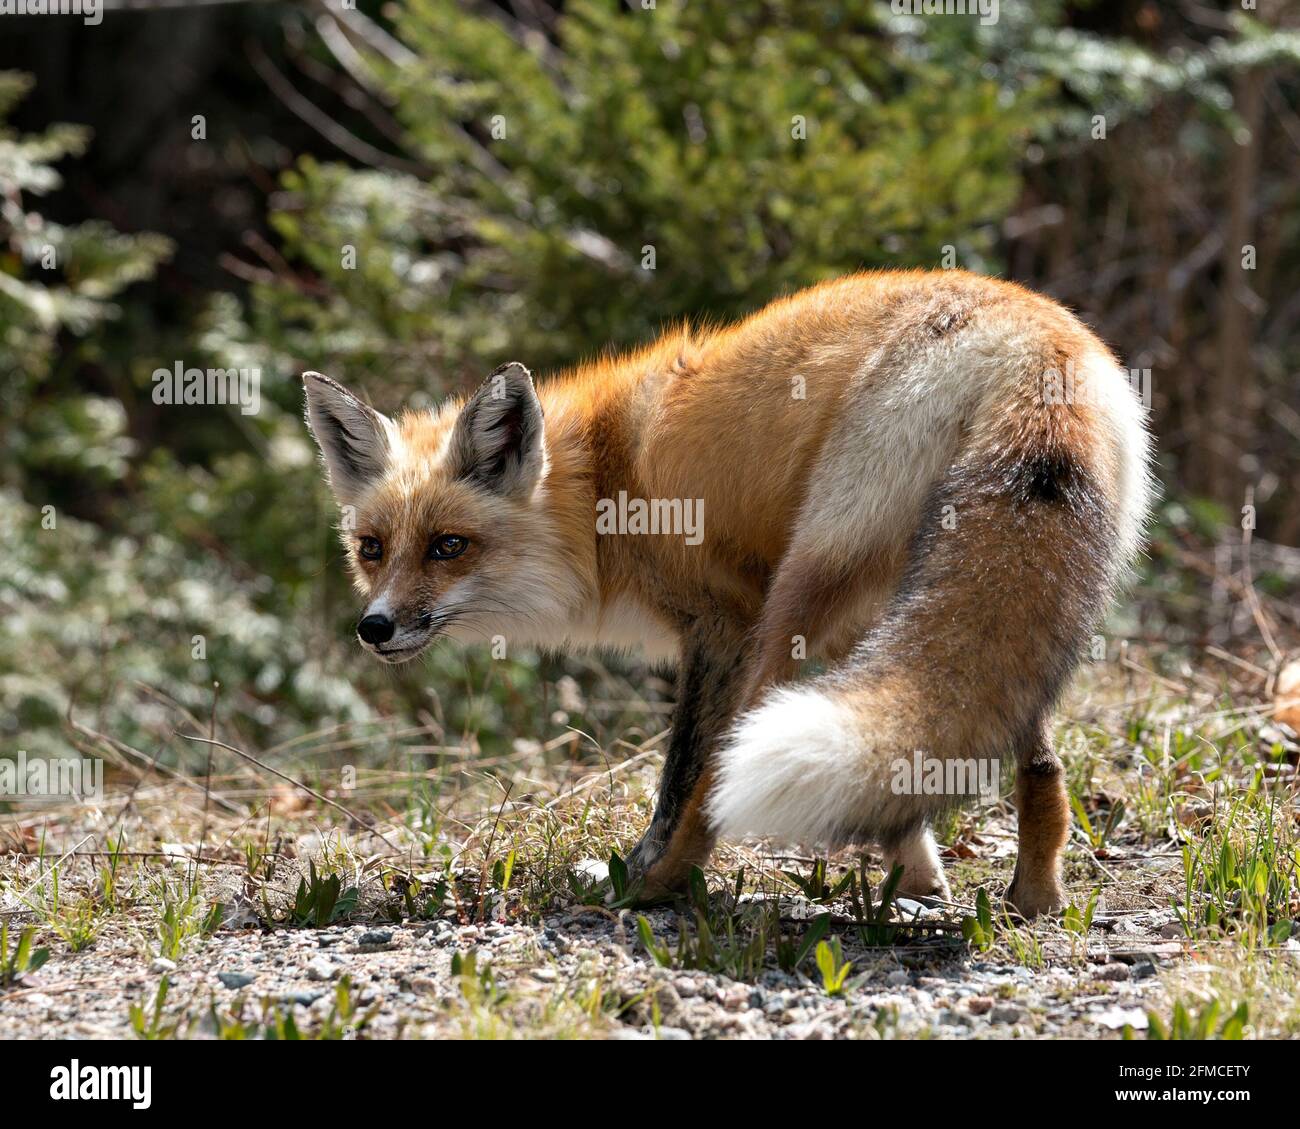 Red fox close up profile behind view in its environment and habitat with a blur forest background, displaying bushy fox tail. Fox Image. Picture. Stock Photo